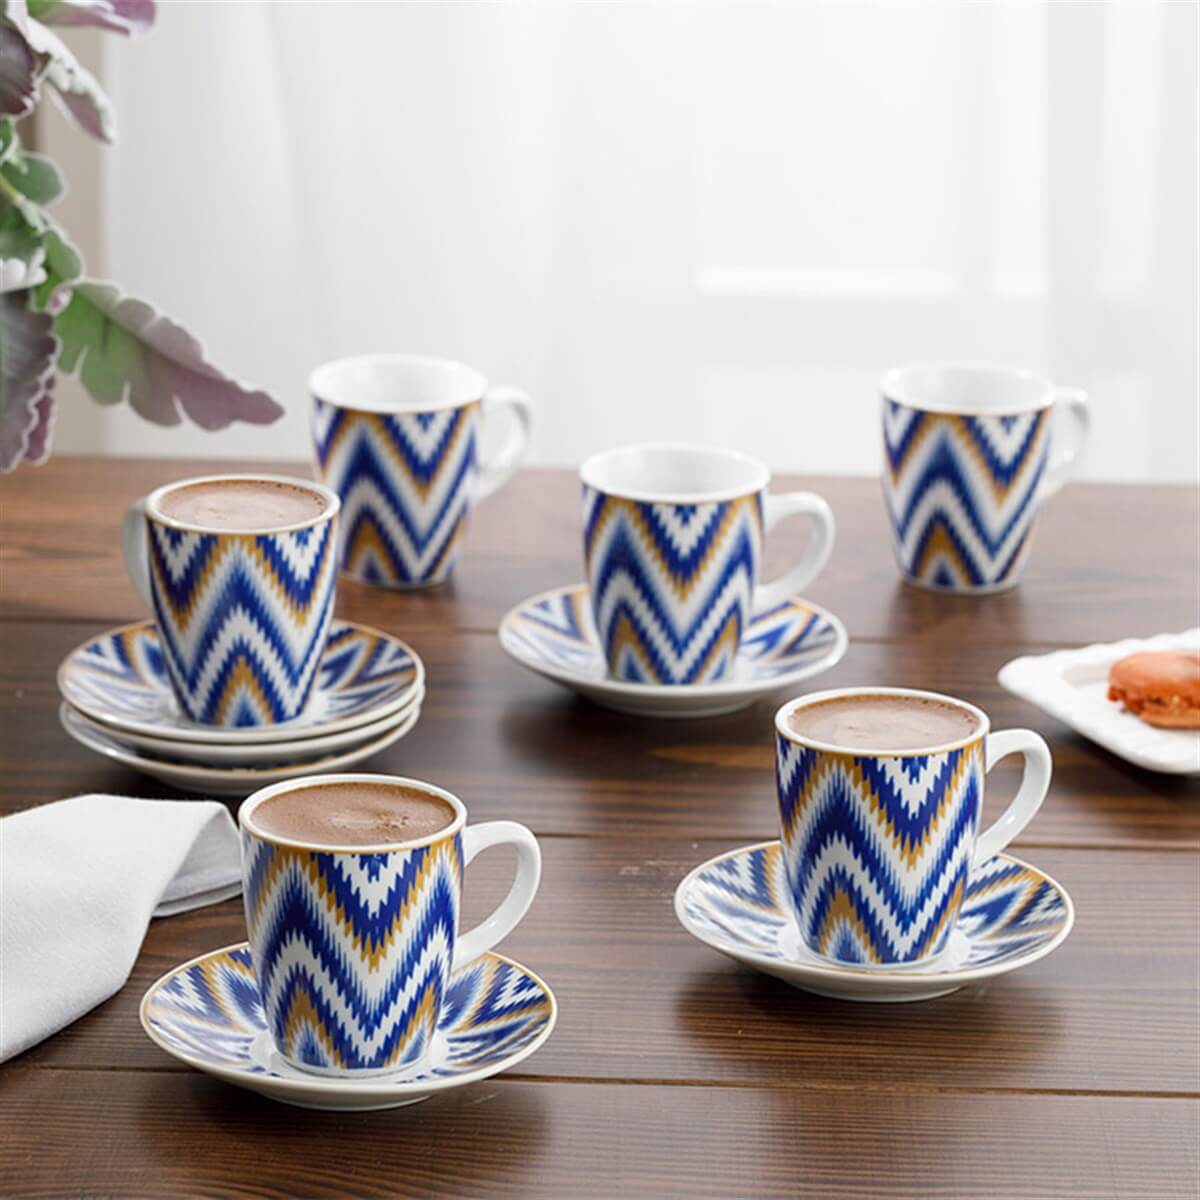 English Home-Eva Porcelain Set of 6 Coffee Cups 100ml Blue - Shop Kitchen &  Dining at Baqqalia.com - Best Brands and Products - Free Worldwide Shipping  Over $150